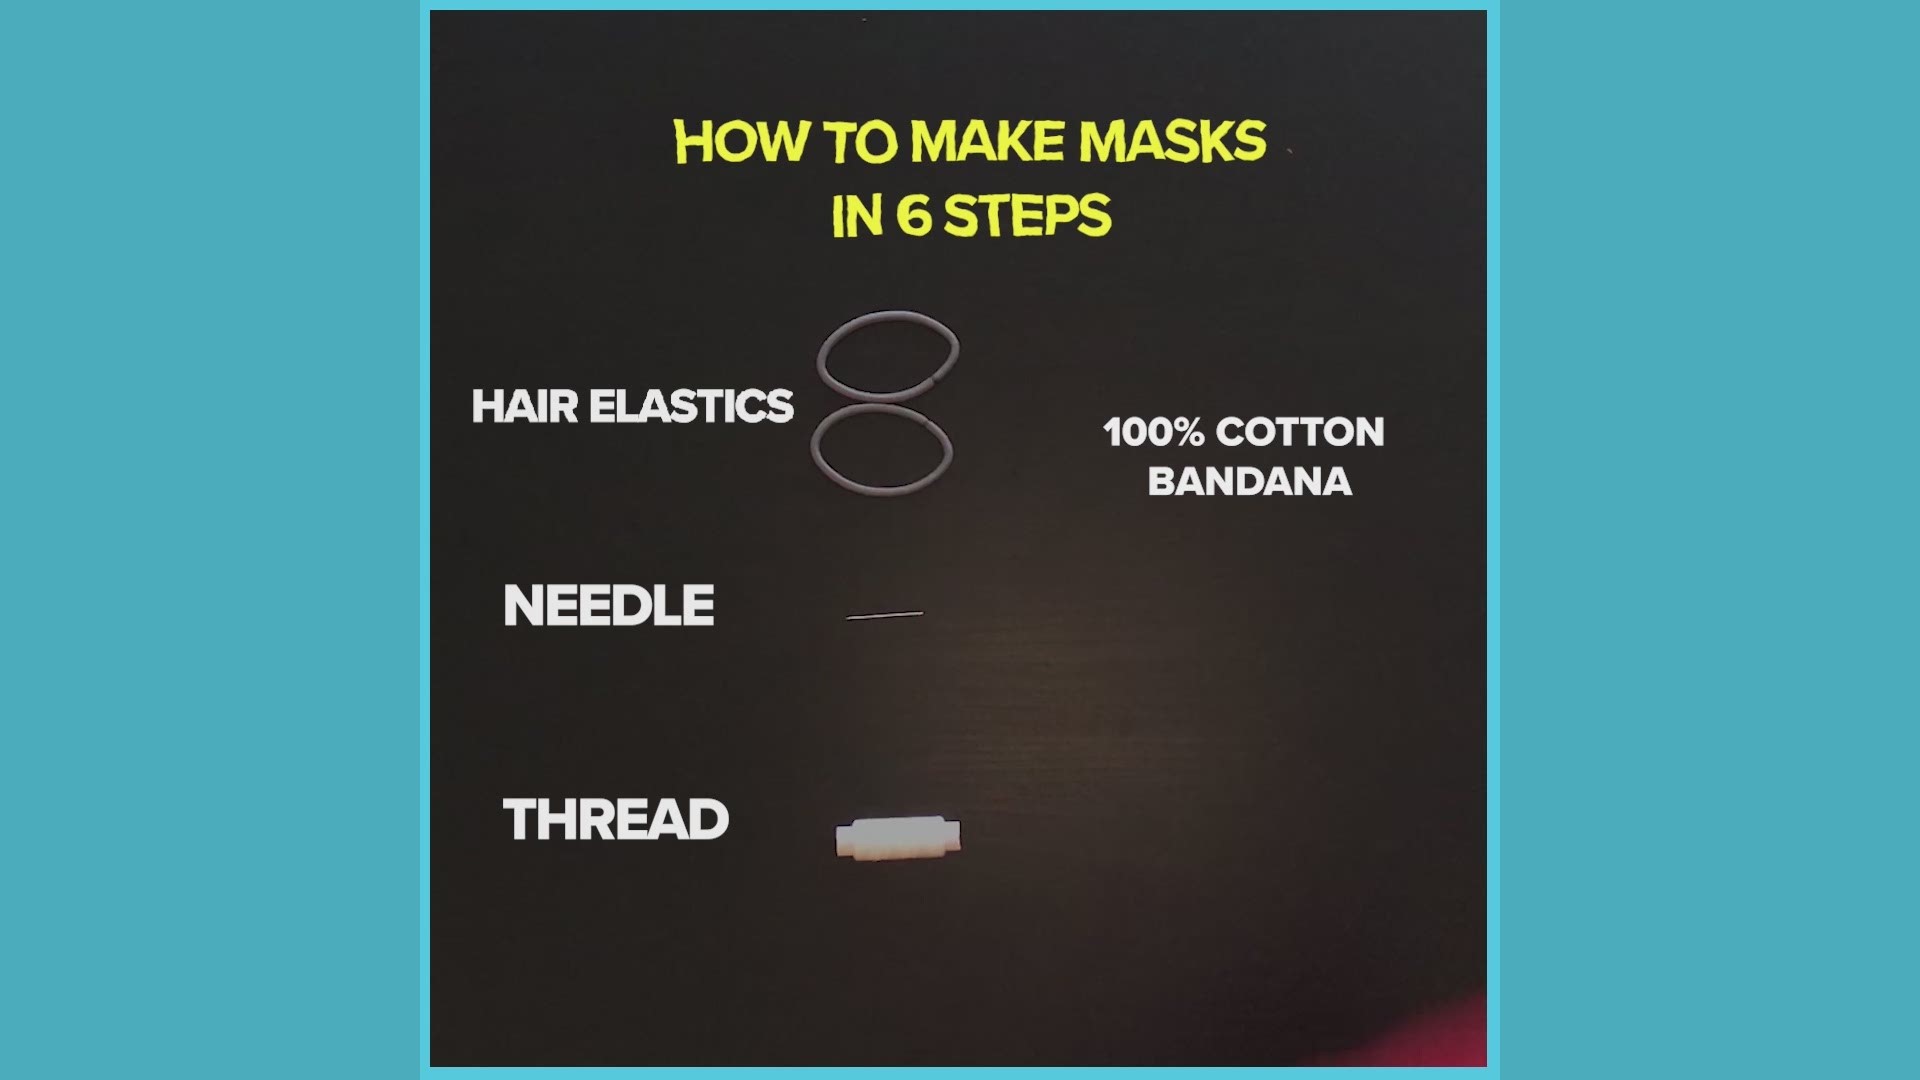 These easy-to-follow instructions will show how to make a face mask to help combat the spread of coronavirus.